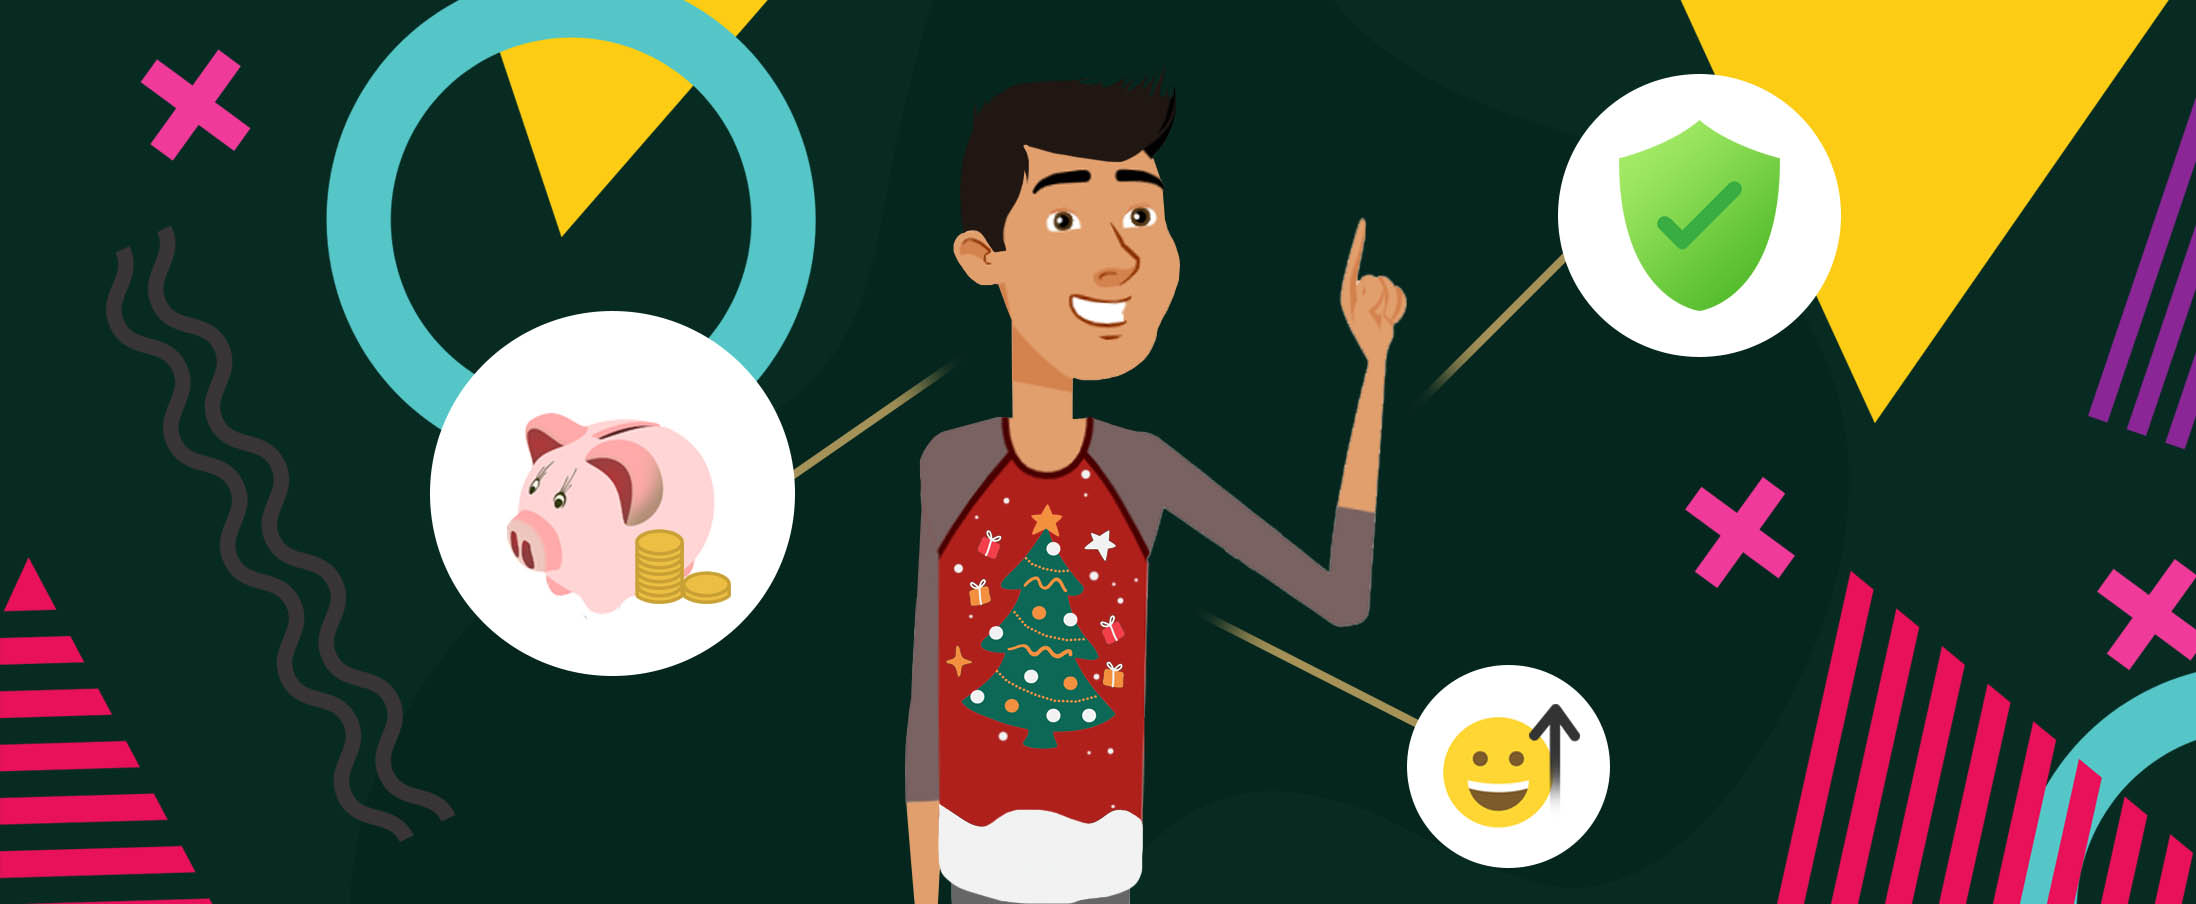 What Are the Benefits of an Online Christmas Party This Year?